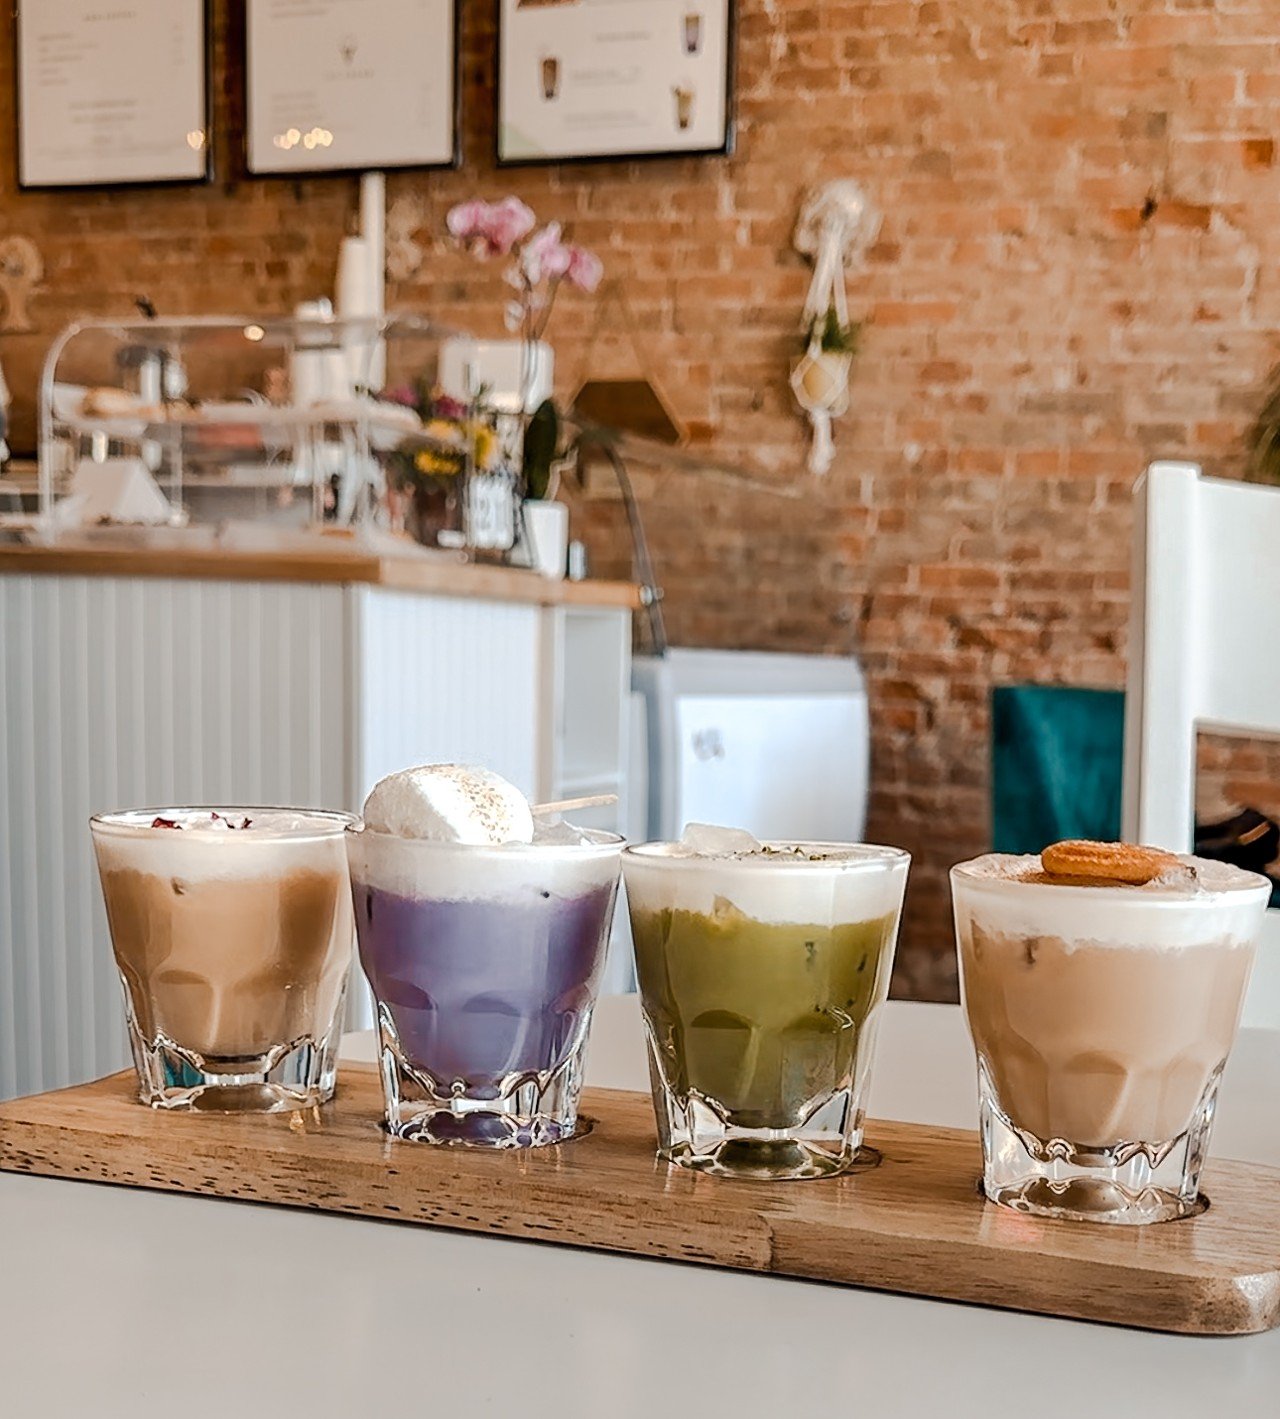 The iced coffee flight includes matcha, butterscotch, ube and strawberry-rose lattes.